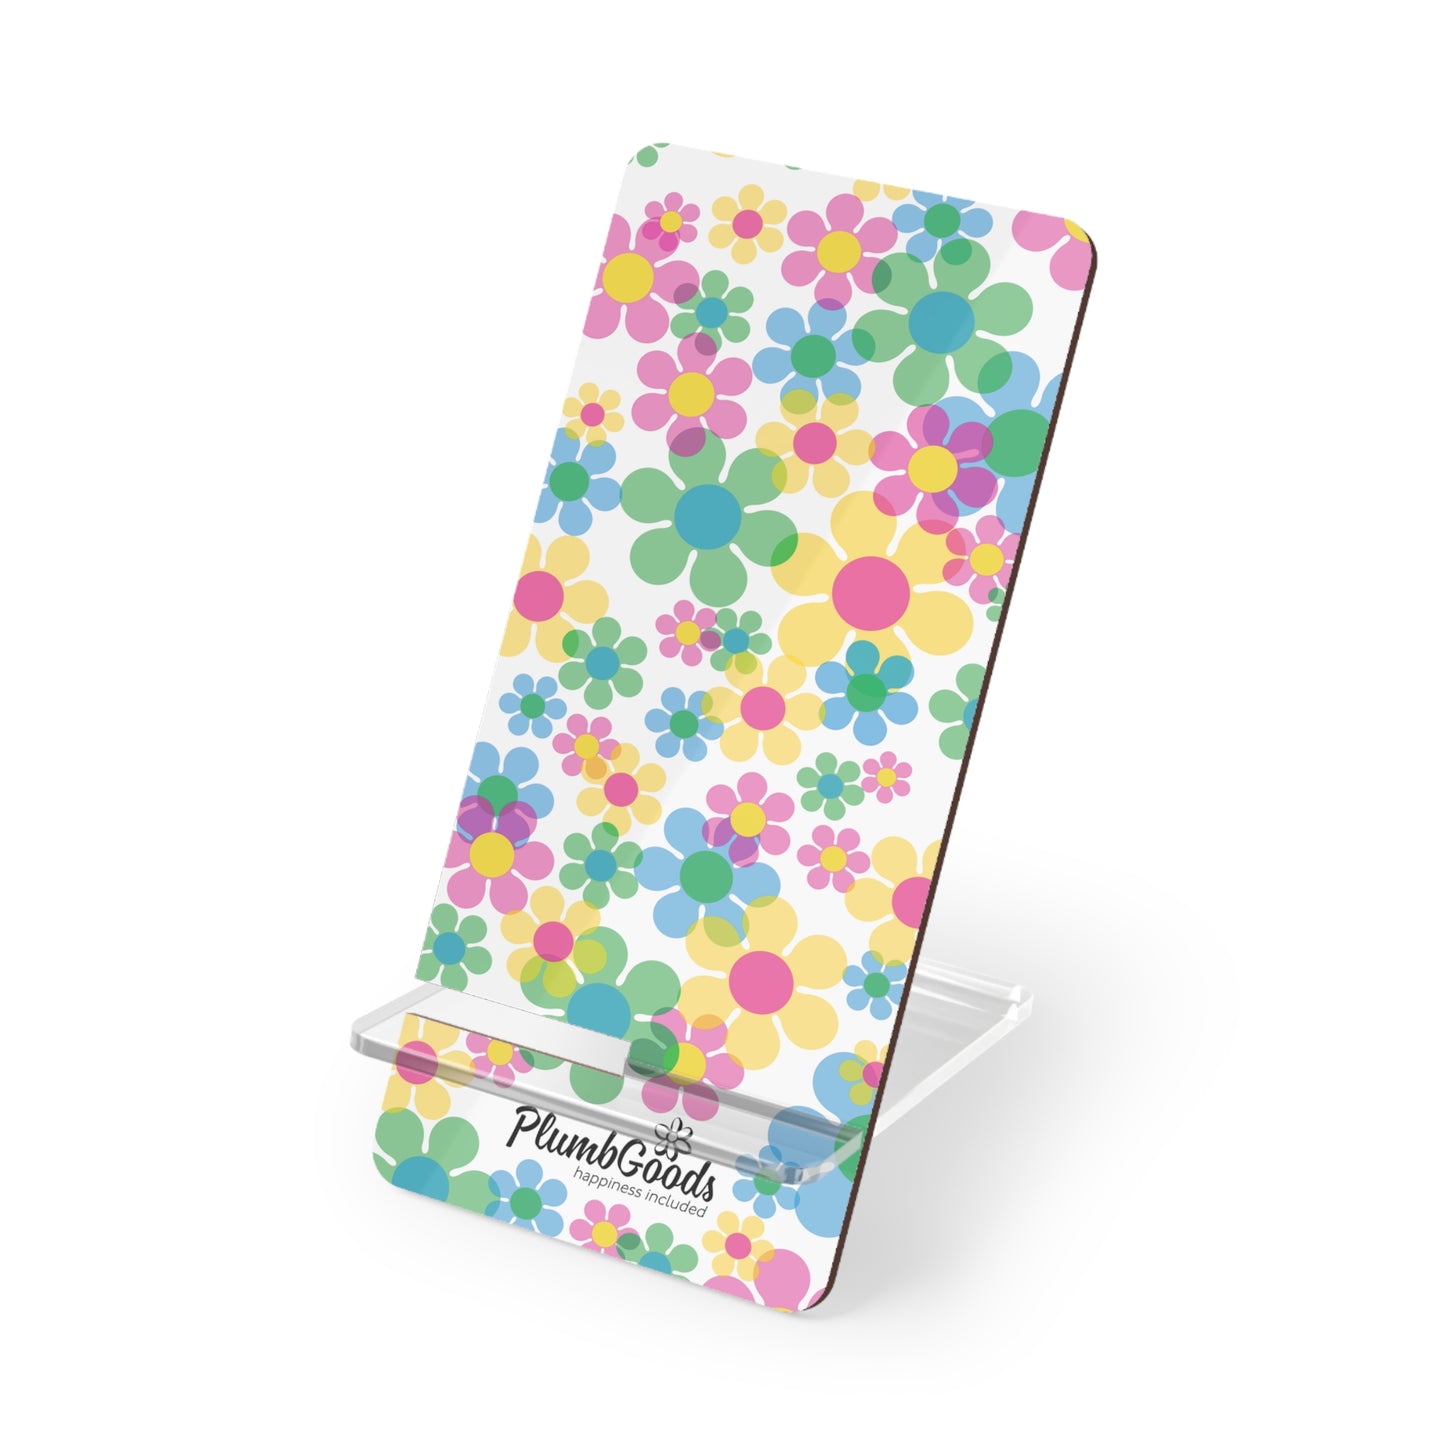 Smartphone Display Stand Floating Daisies